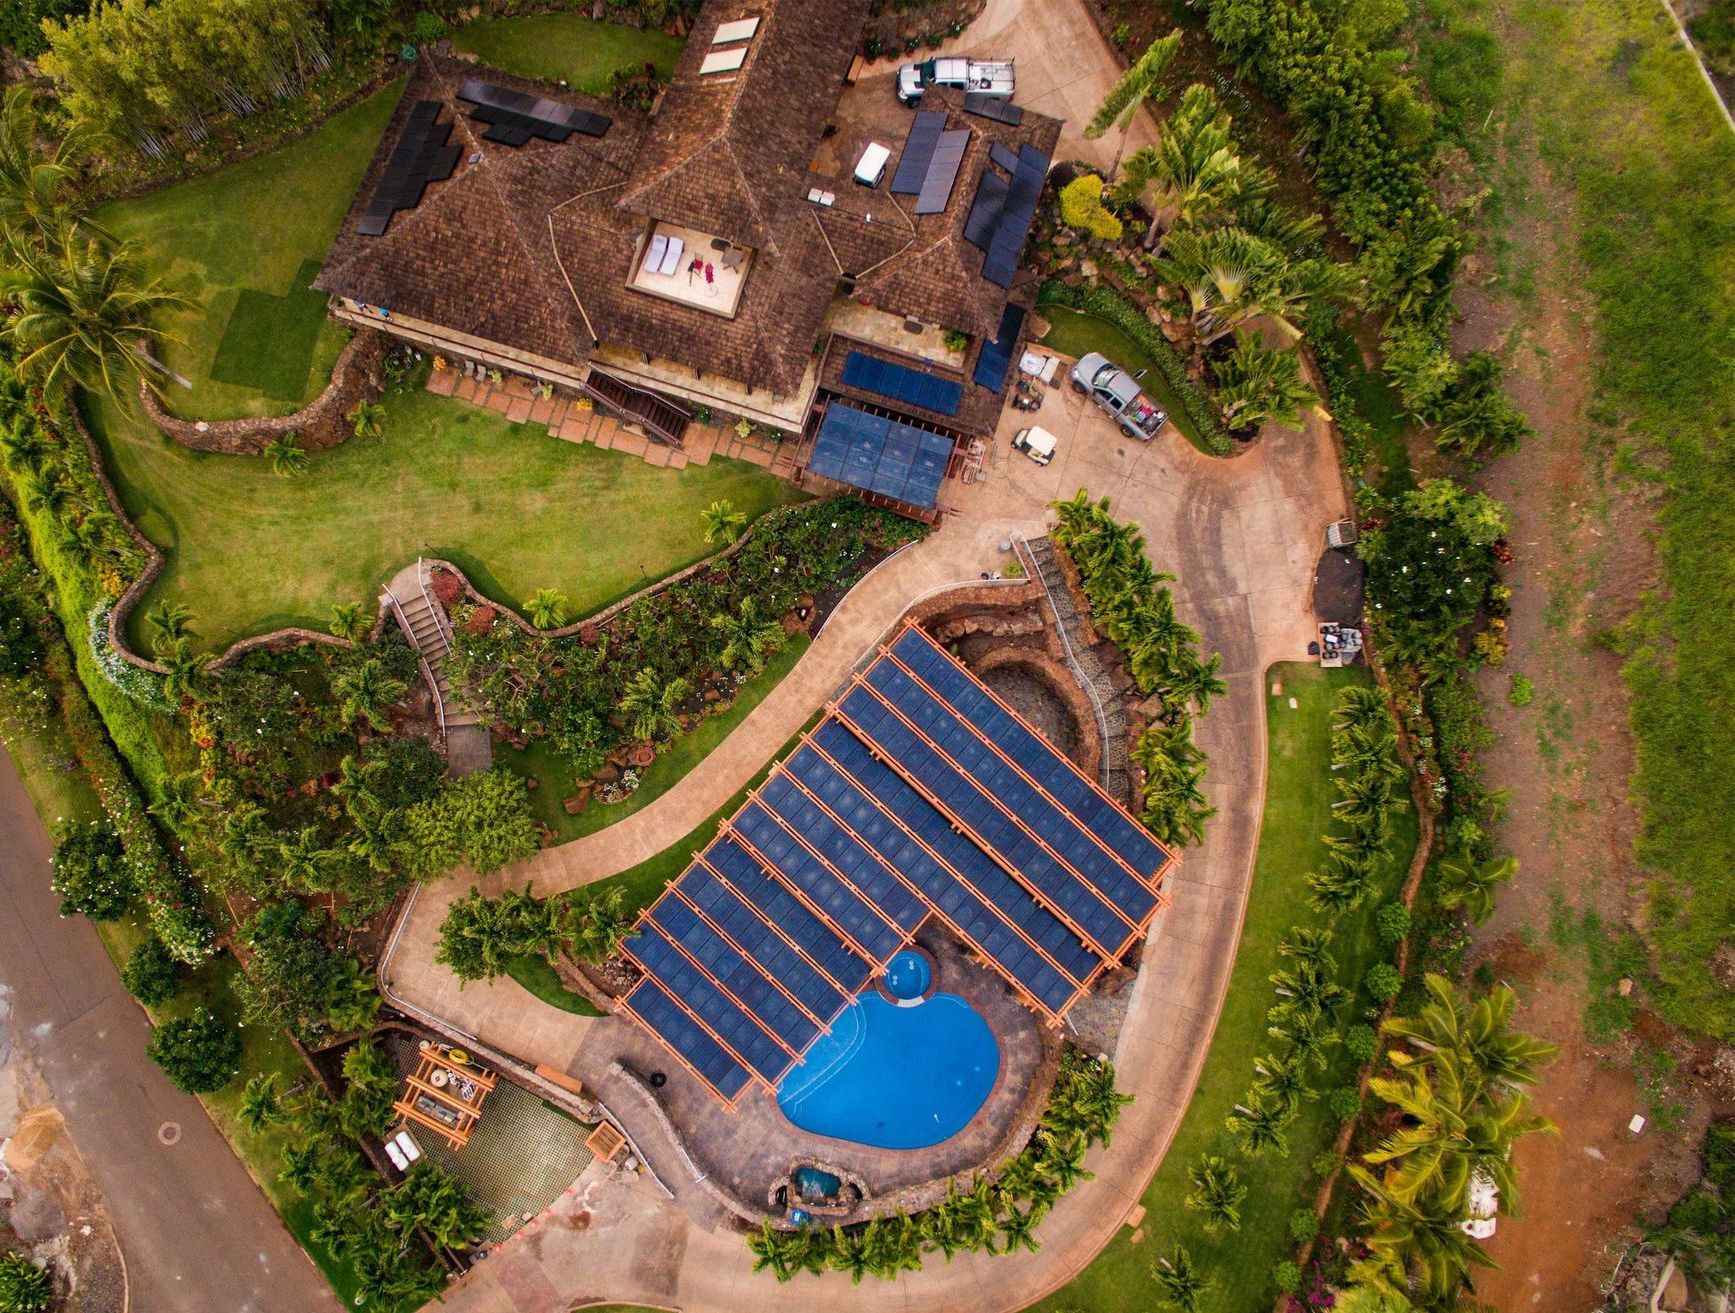 An aerial view of a Ryan Levis house in Maui with a pool and solar panels on the roof.